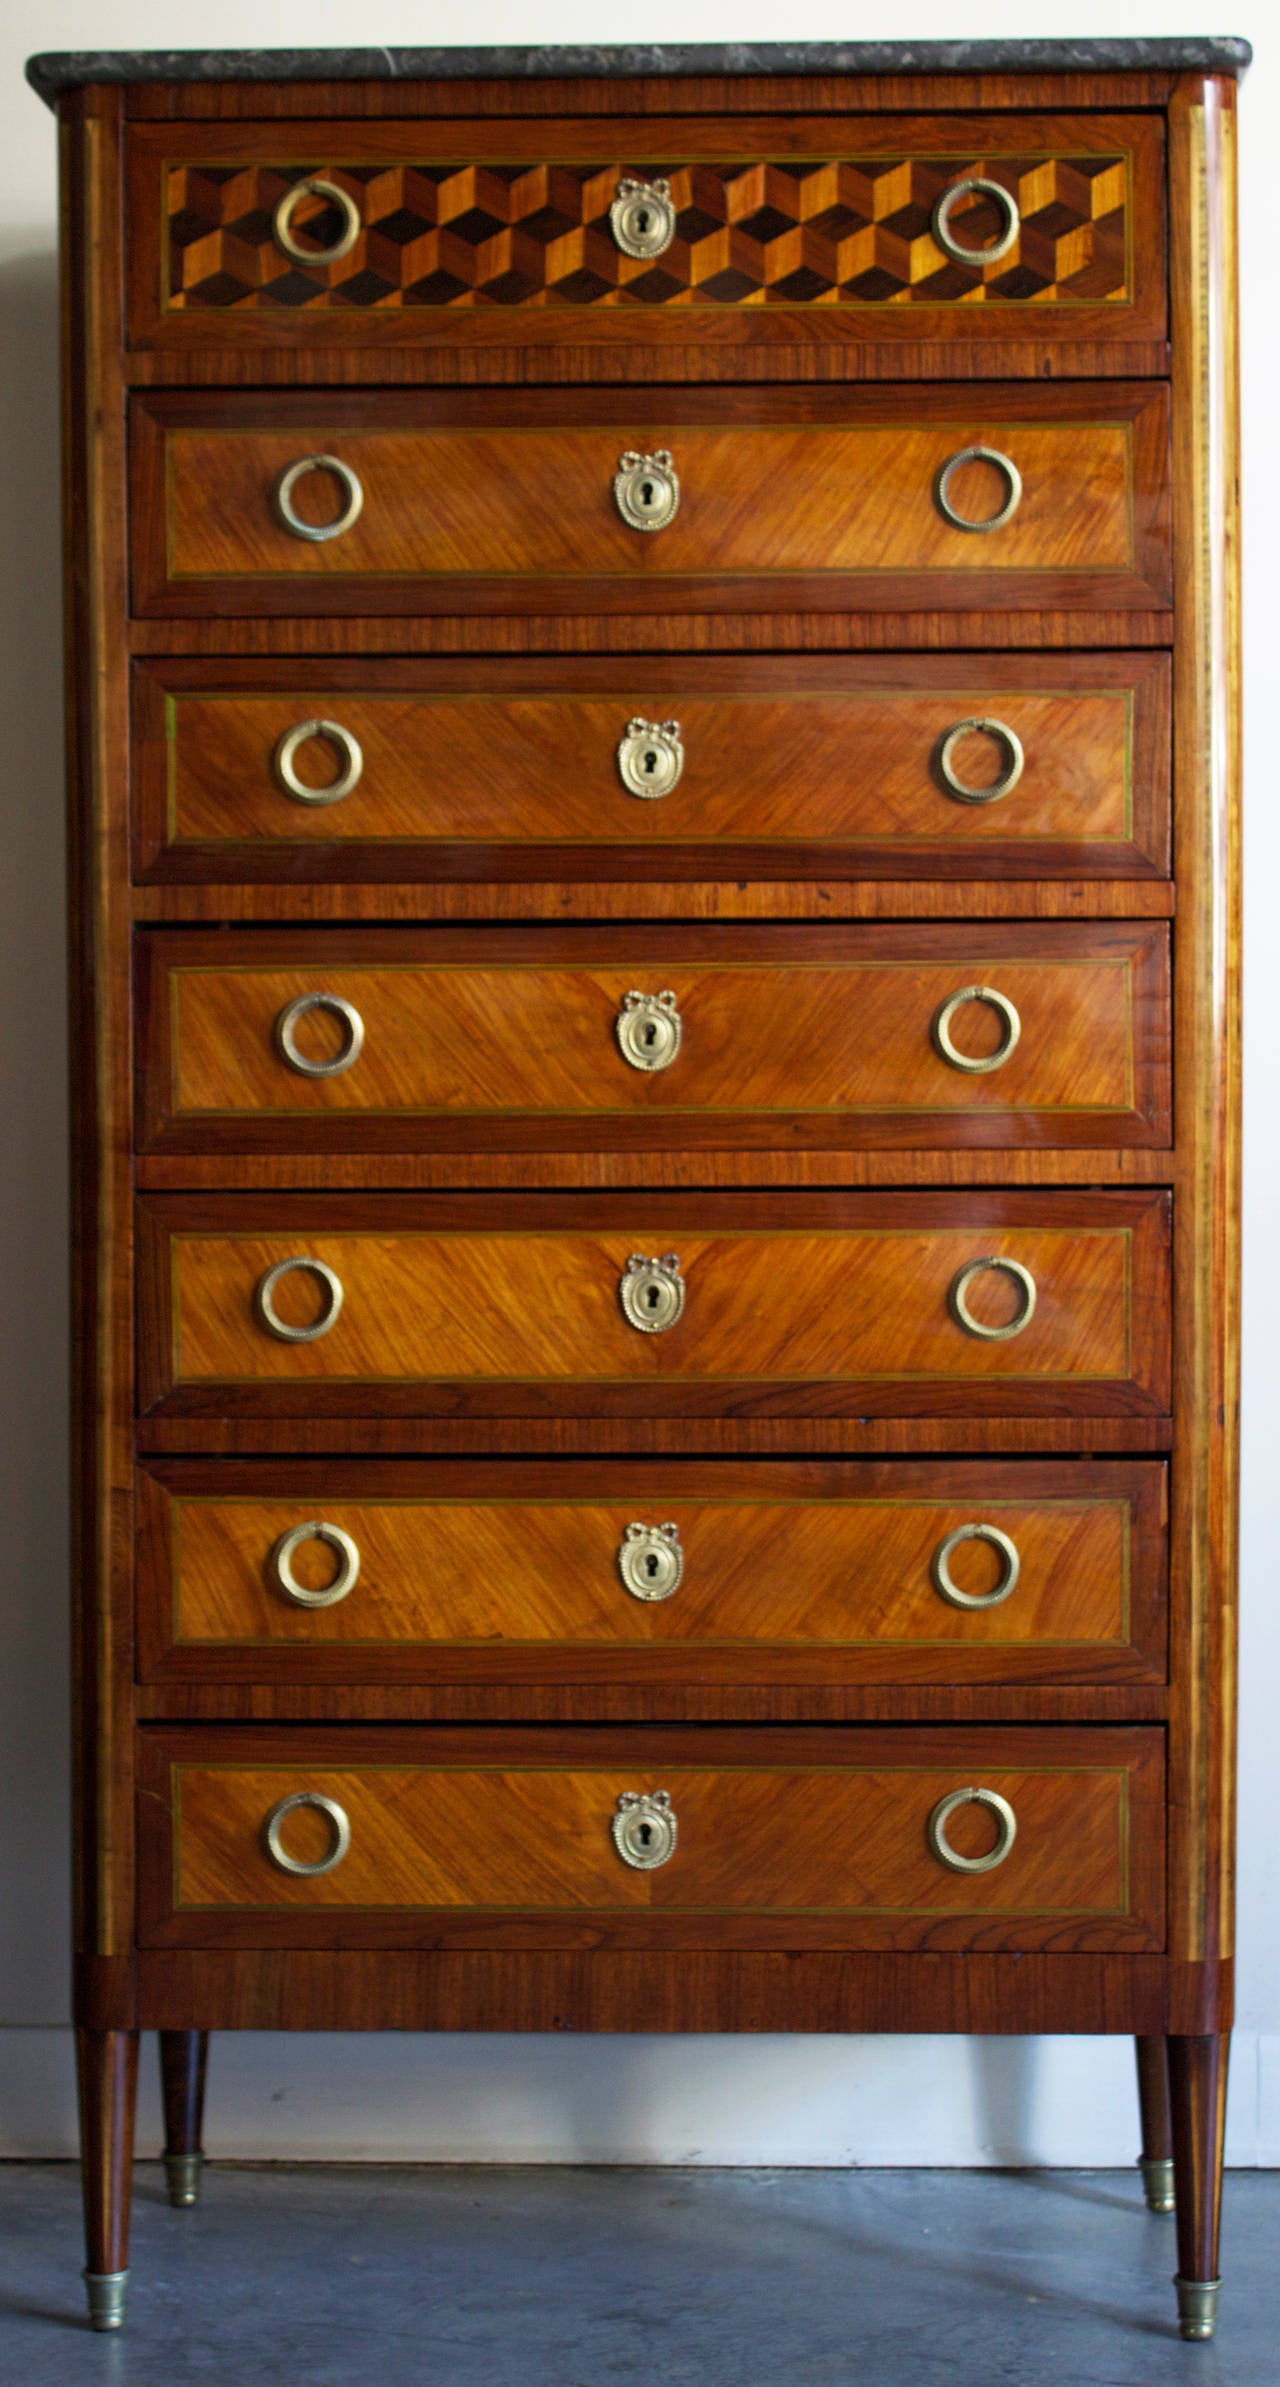 Highly decorative and wonderful marquetry on oak work for this seven banded drawer’s semainier (semaine in French is a week i.e. 7 days) made during Napoleon III period.\The top drawer shows an exceptional marquetry of cubes (front and sides) made